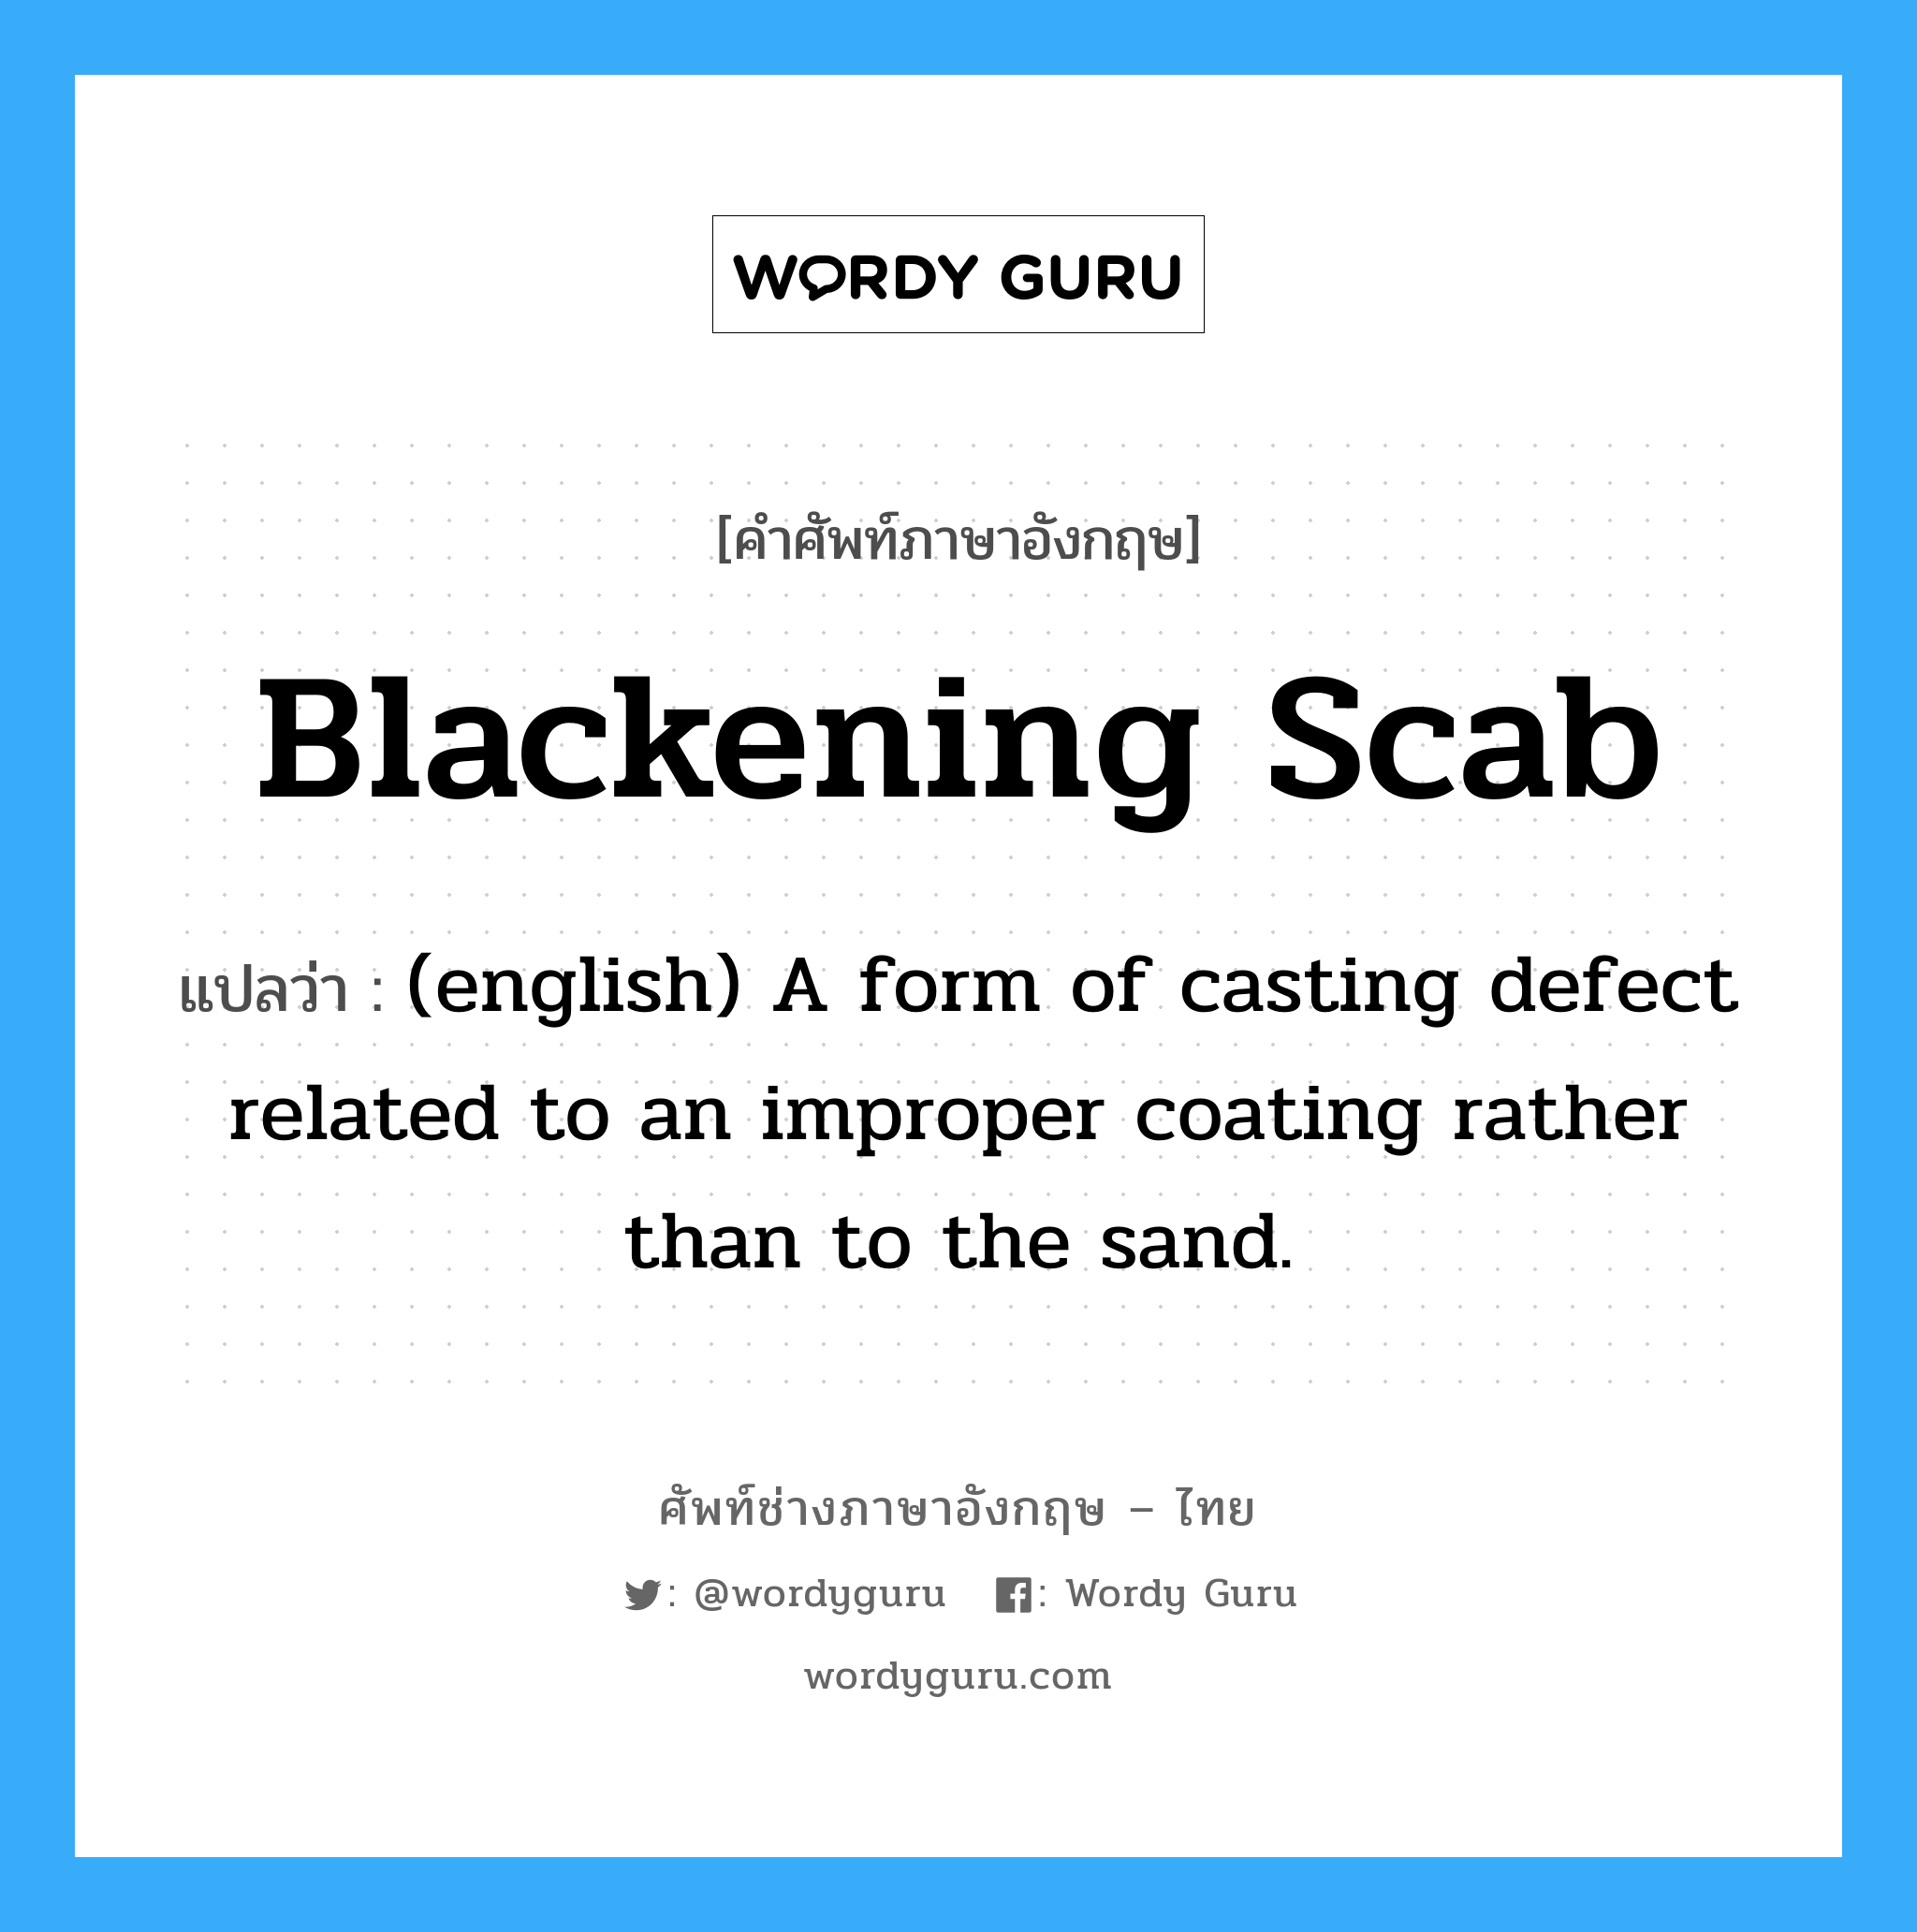 Blackening Scab แปลว่า?, คำศัพท์ช่างภาษาอังกฤษ - ไทย Blackening Scab คำศัพท์ภาษาอังกฤษ Blackening Scab แปลว่า (english) A form of casting defect related to an improper coating rather than to the sand.